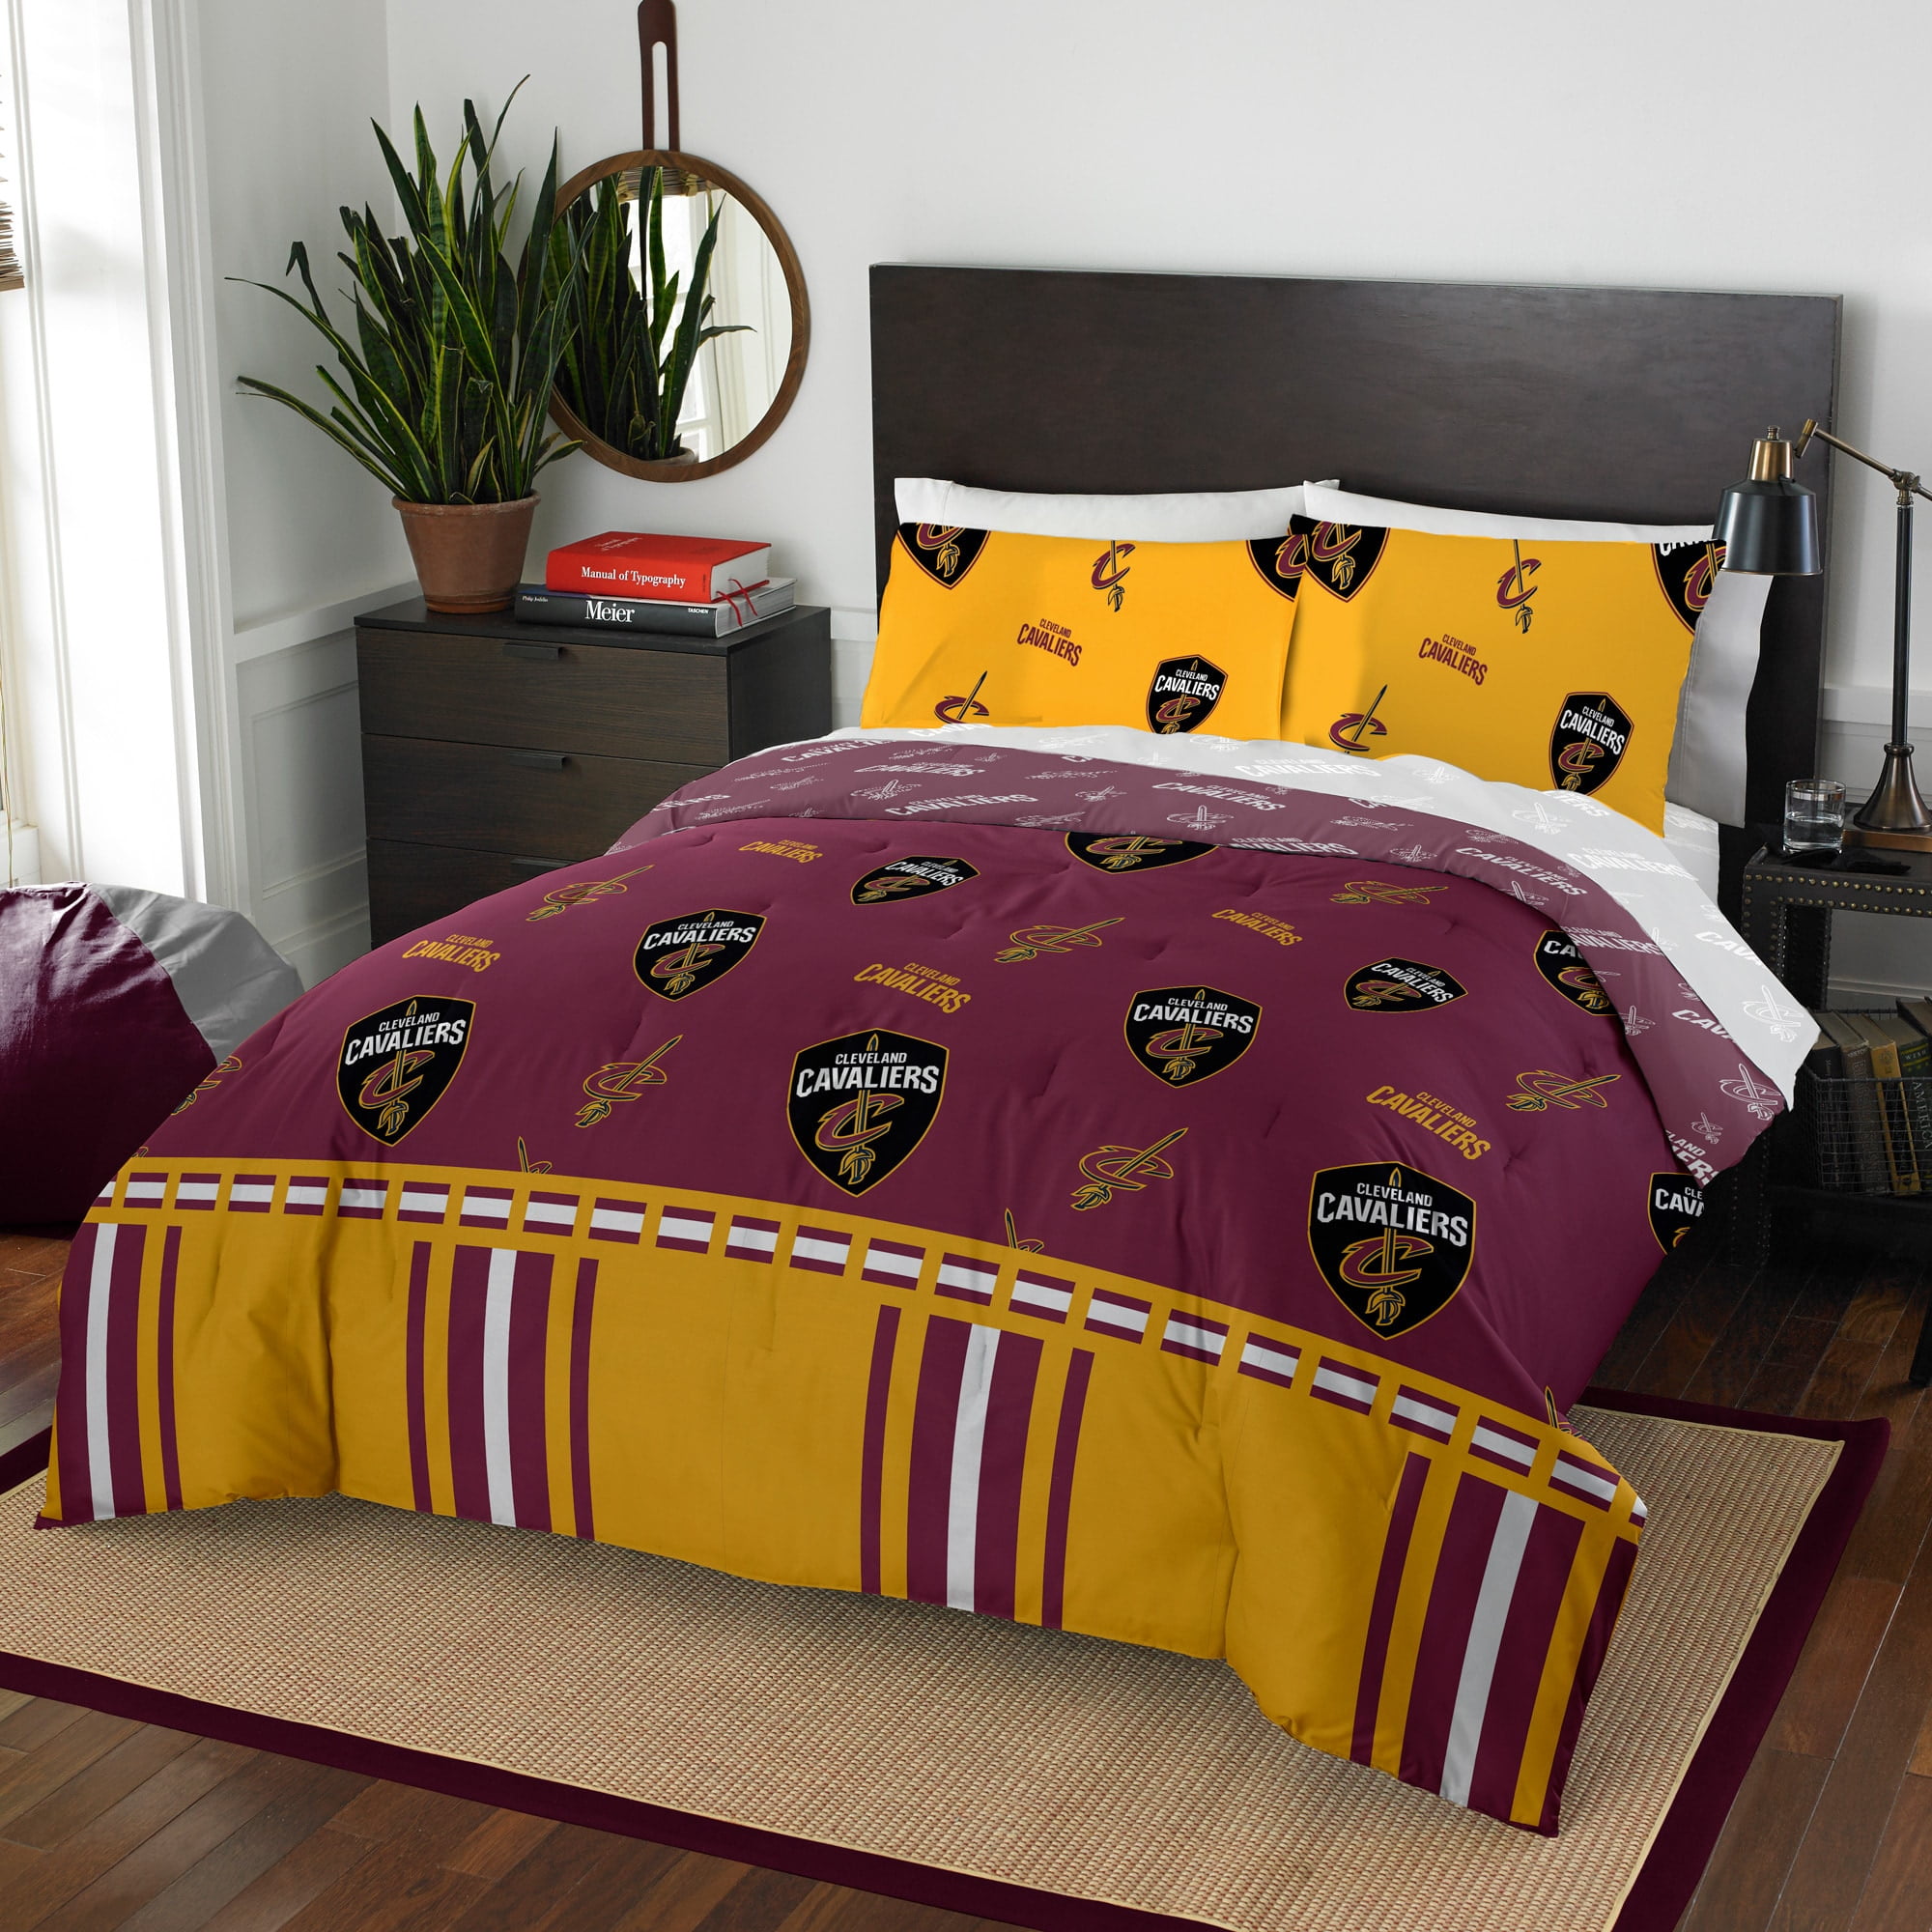 NBA Cleveland Cavaliers Bed in Bag Set, Queen Size, Team Colors, 100%  Polyester, 5 Piece Set - Walmart.com